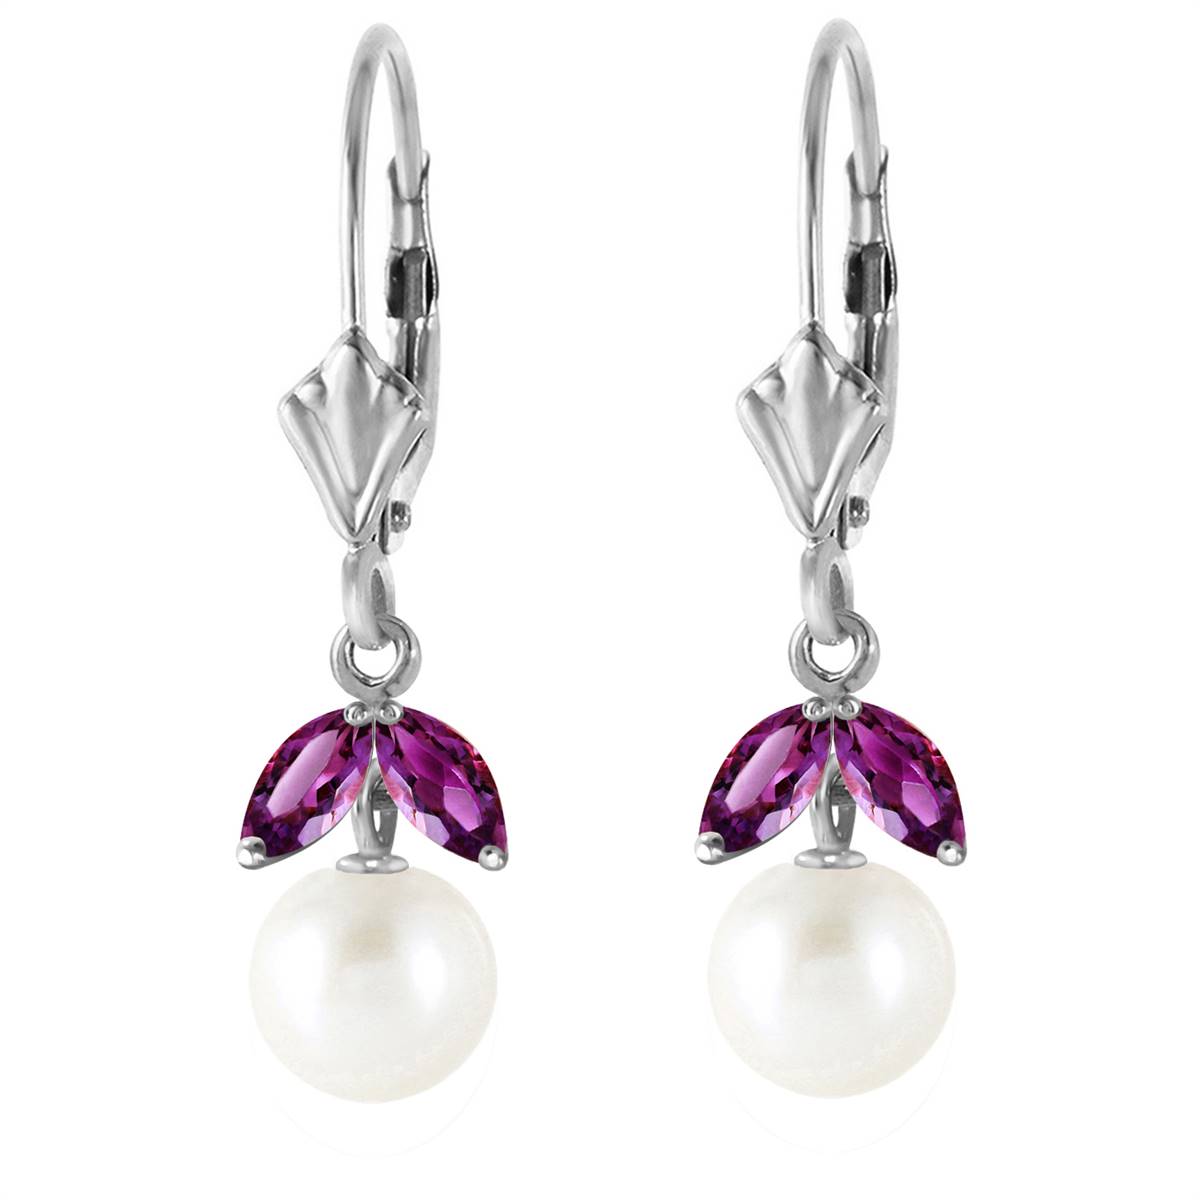 4.4 Carat 14K Solid White Gold Found My Passion Pearl Amethyst Earrings